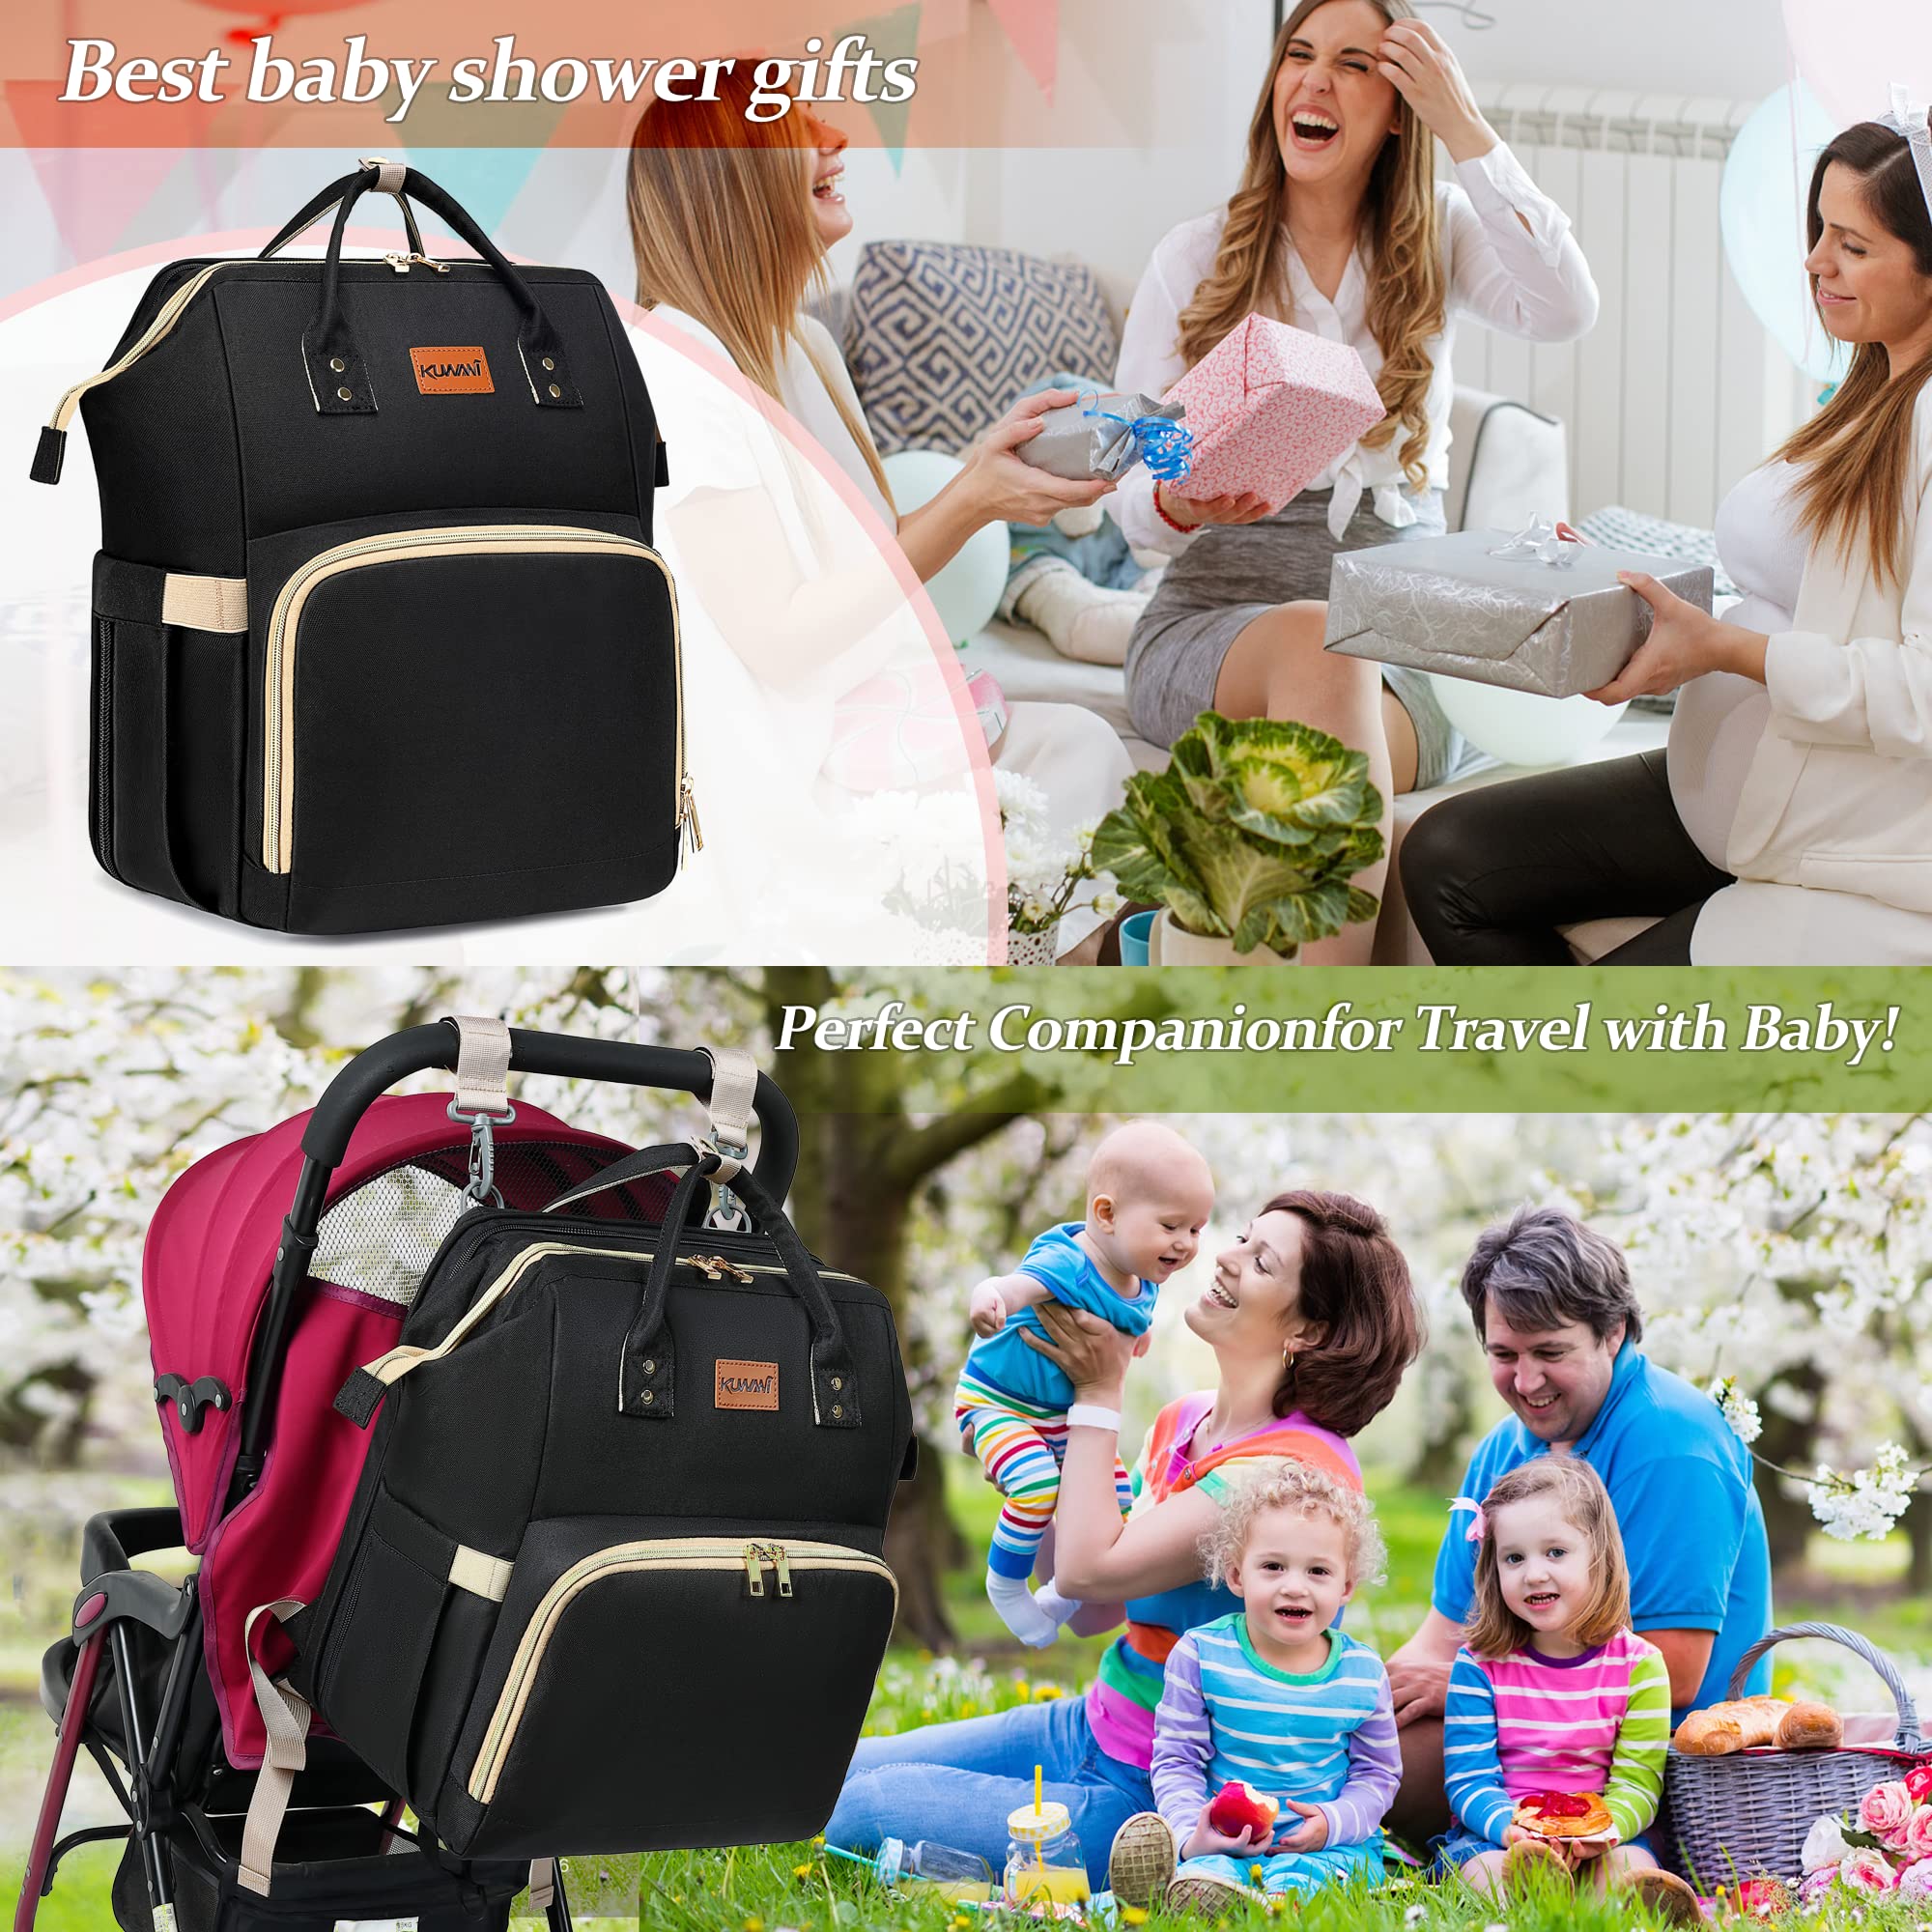 KUWANI Diaper Bag Backpack, Multifunction Travel Baby Changing Bags for Dad/Mom, Large Unisex Waterproof Diaper Backpack with Stroller Straps, Baby Registry Search(Black)